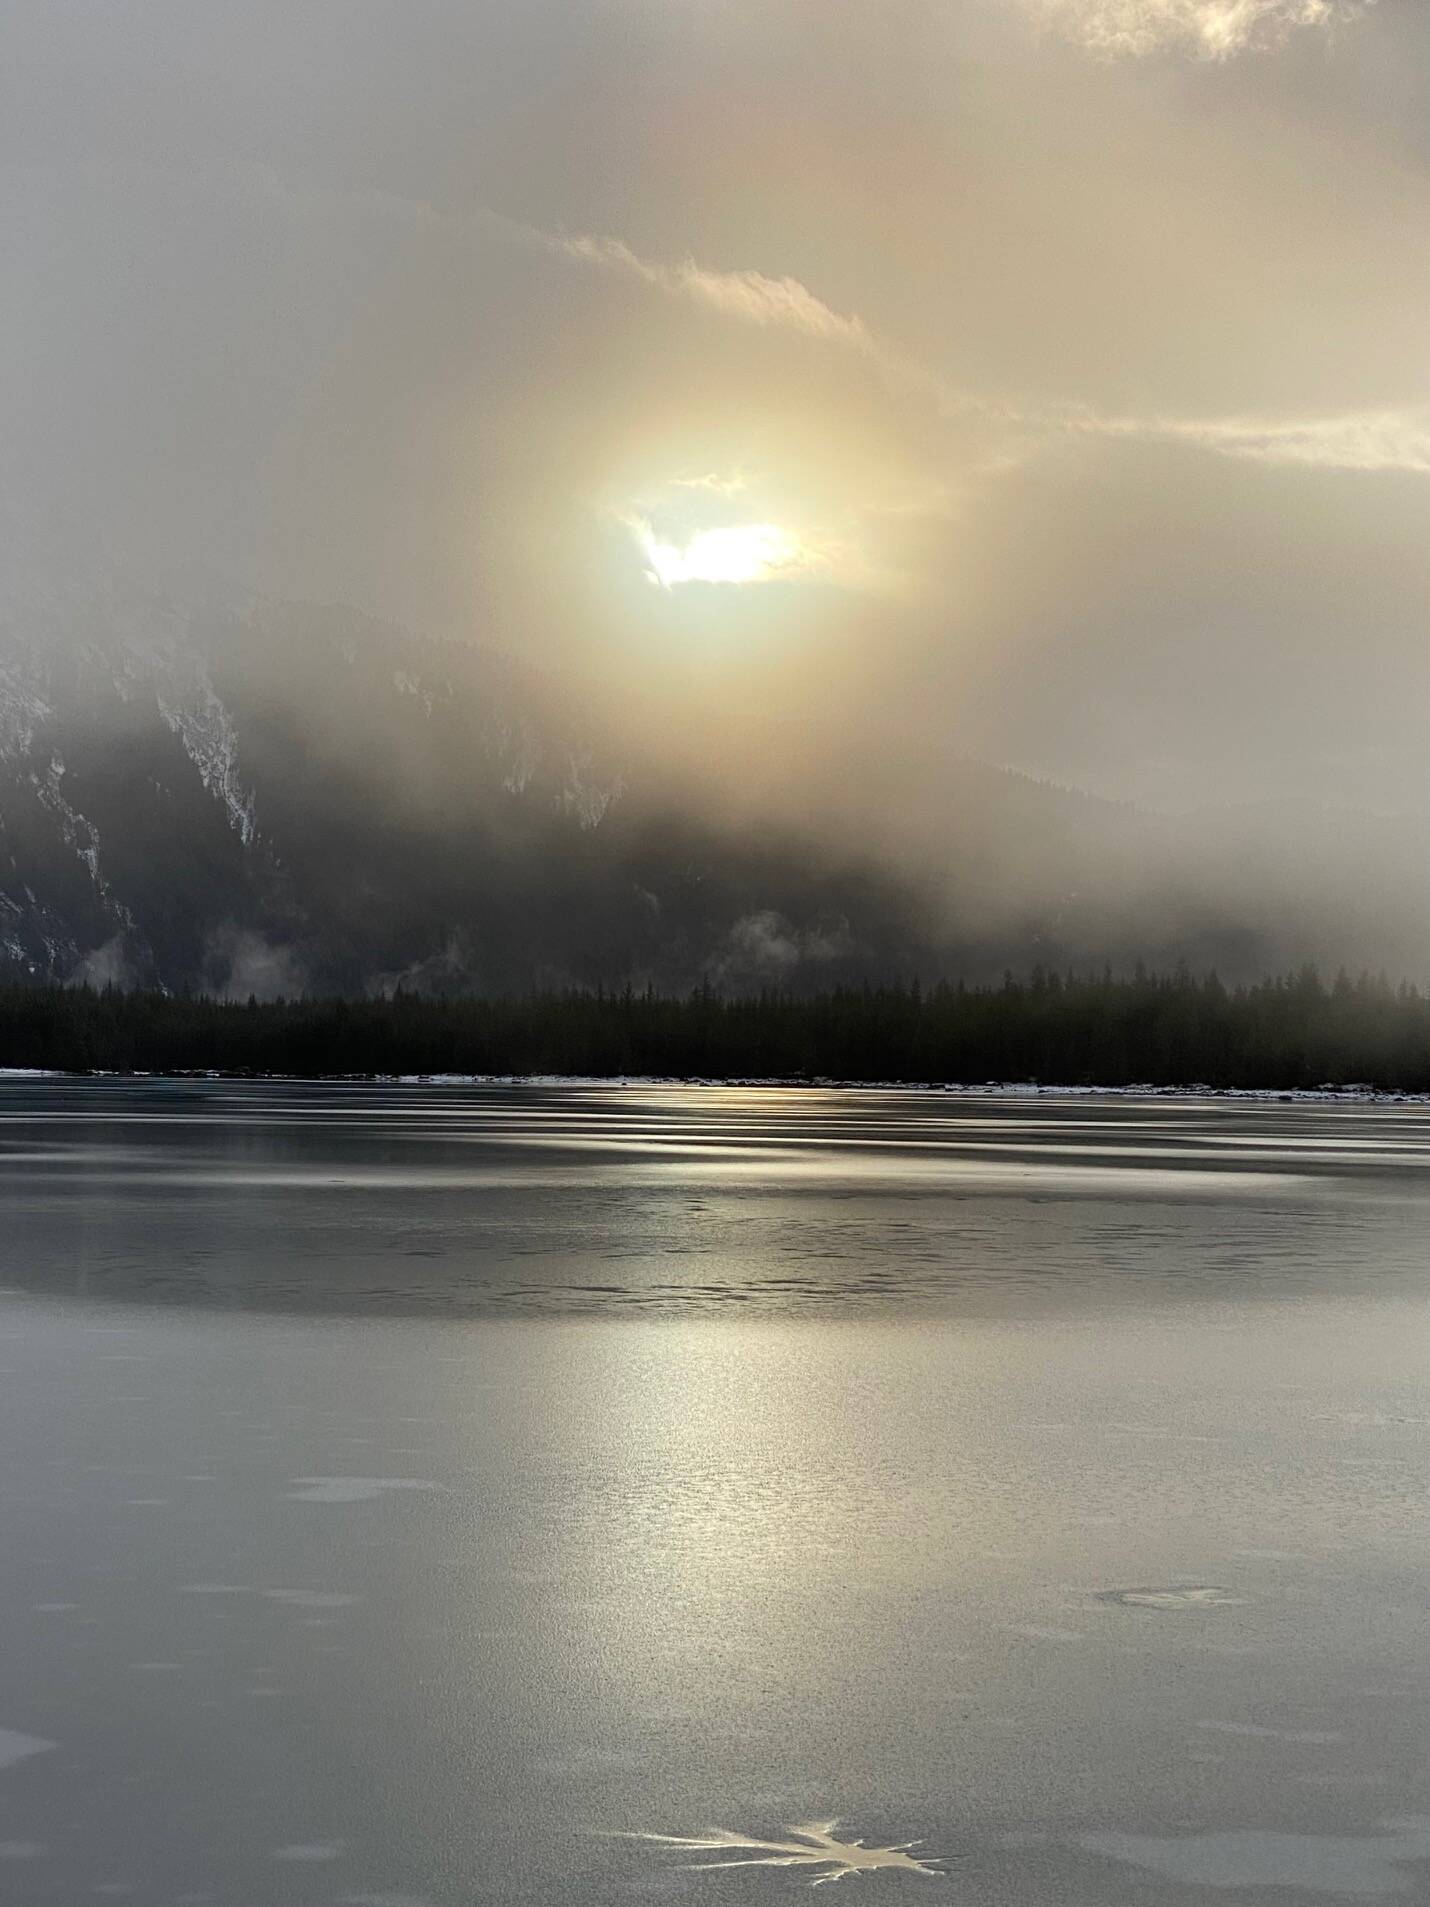 Breaking through the clouds on a gray day, the sun makes a brief appearance shining across Mendenhall Lake on Nov. 22. (Photo by Denise Carroll)